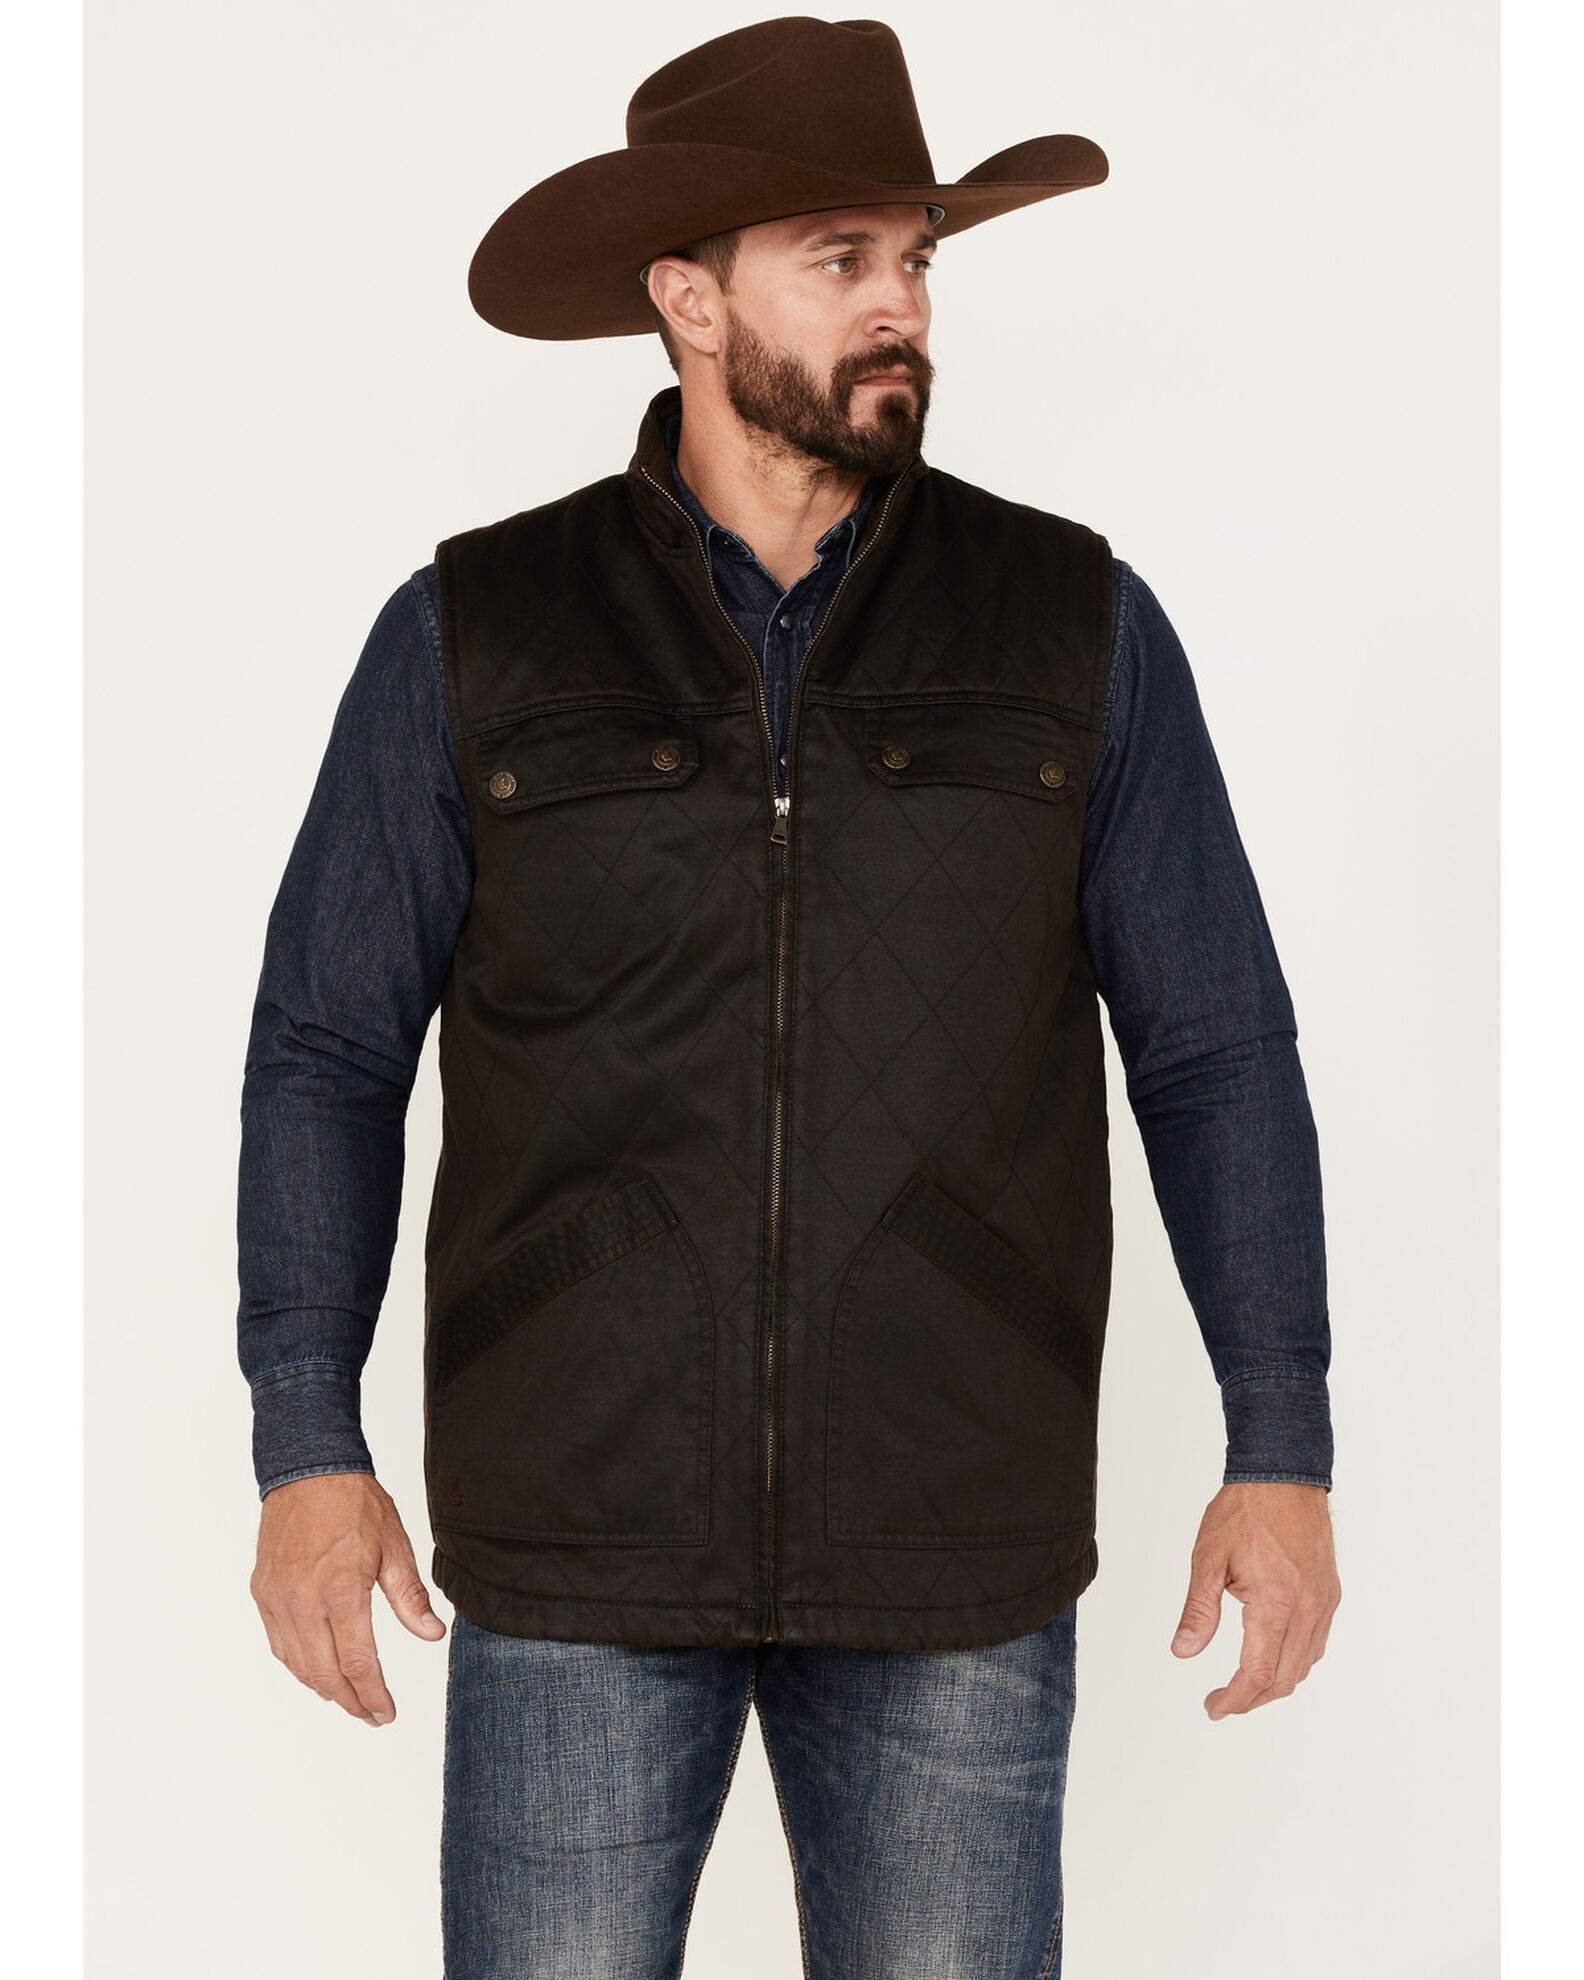 Product Name: Cody James Men's Perryton Quilted Field Vest